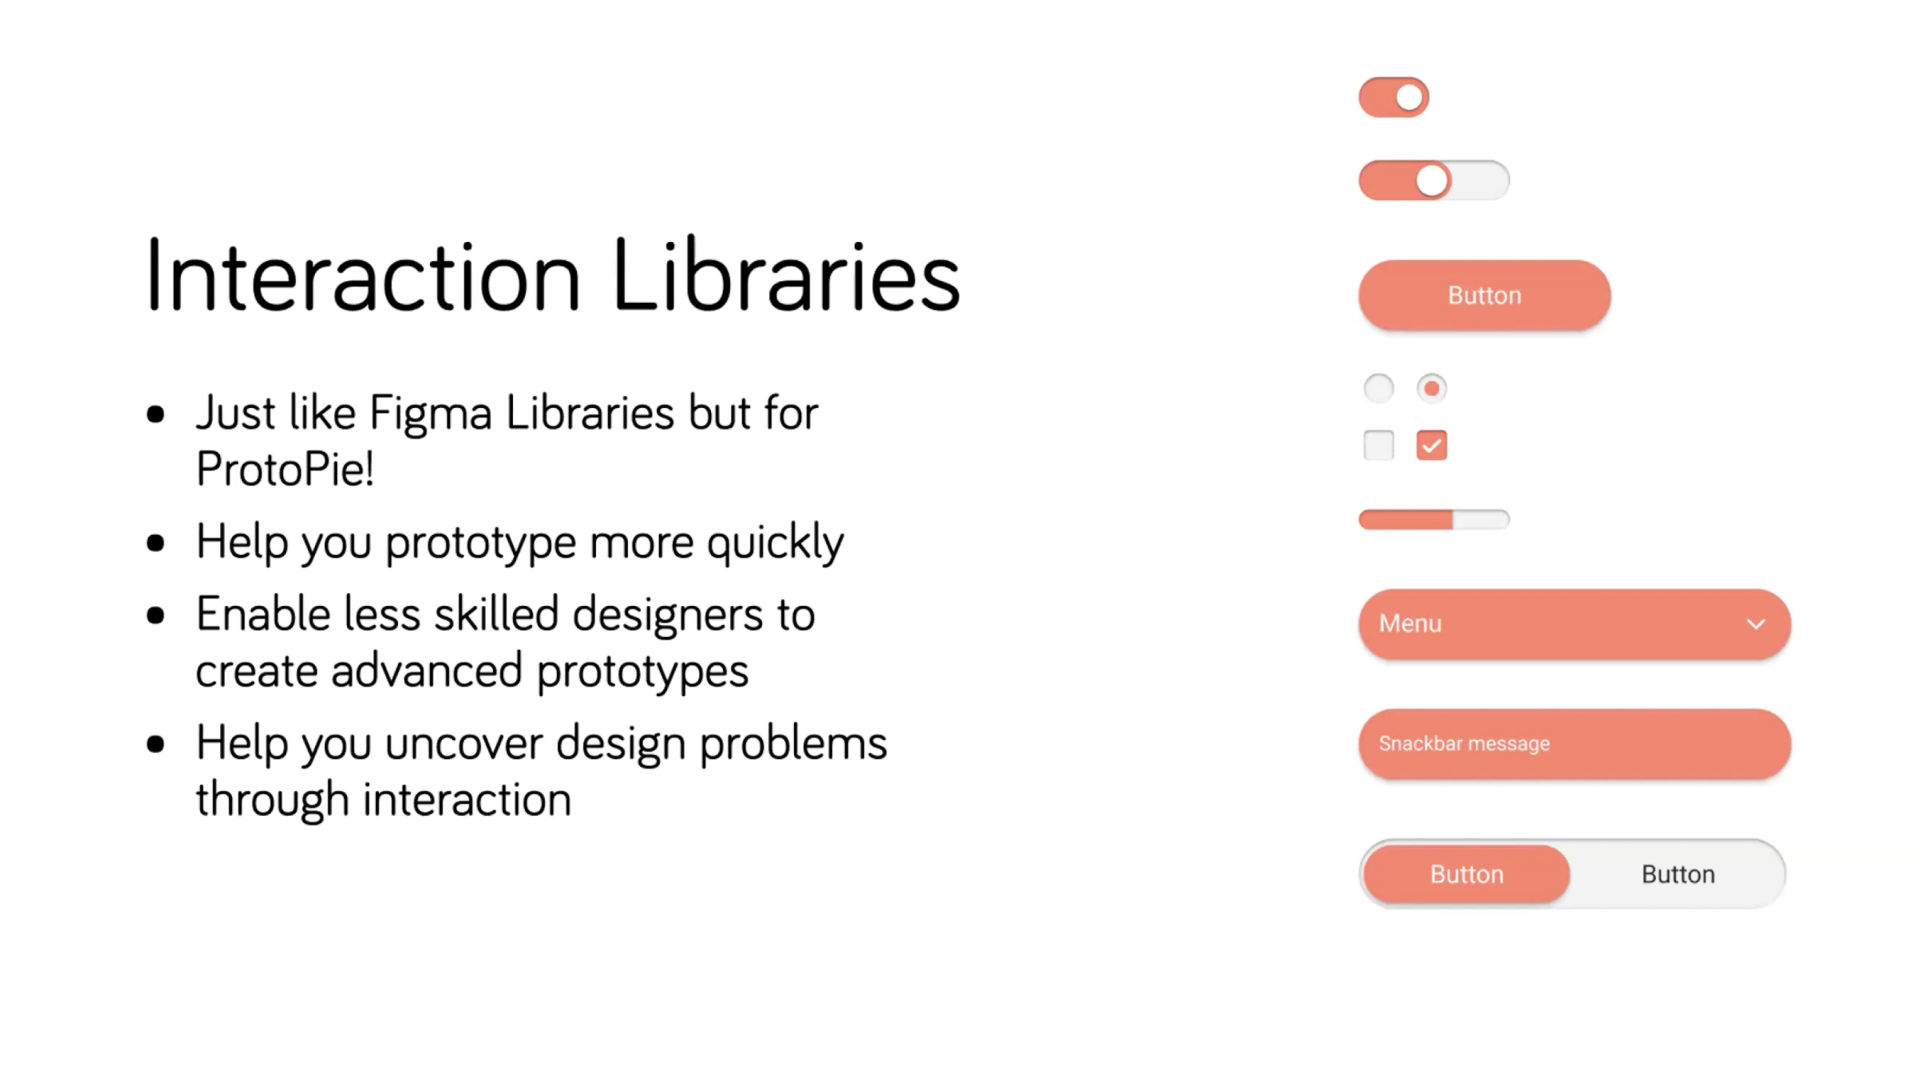 Interaction libraries.